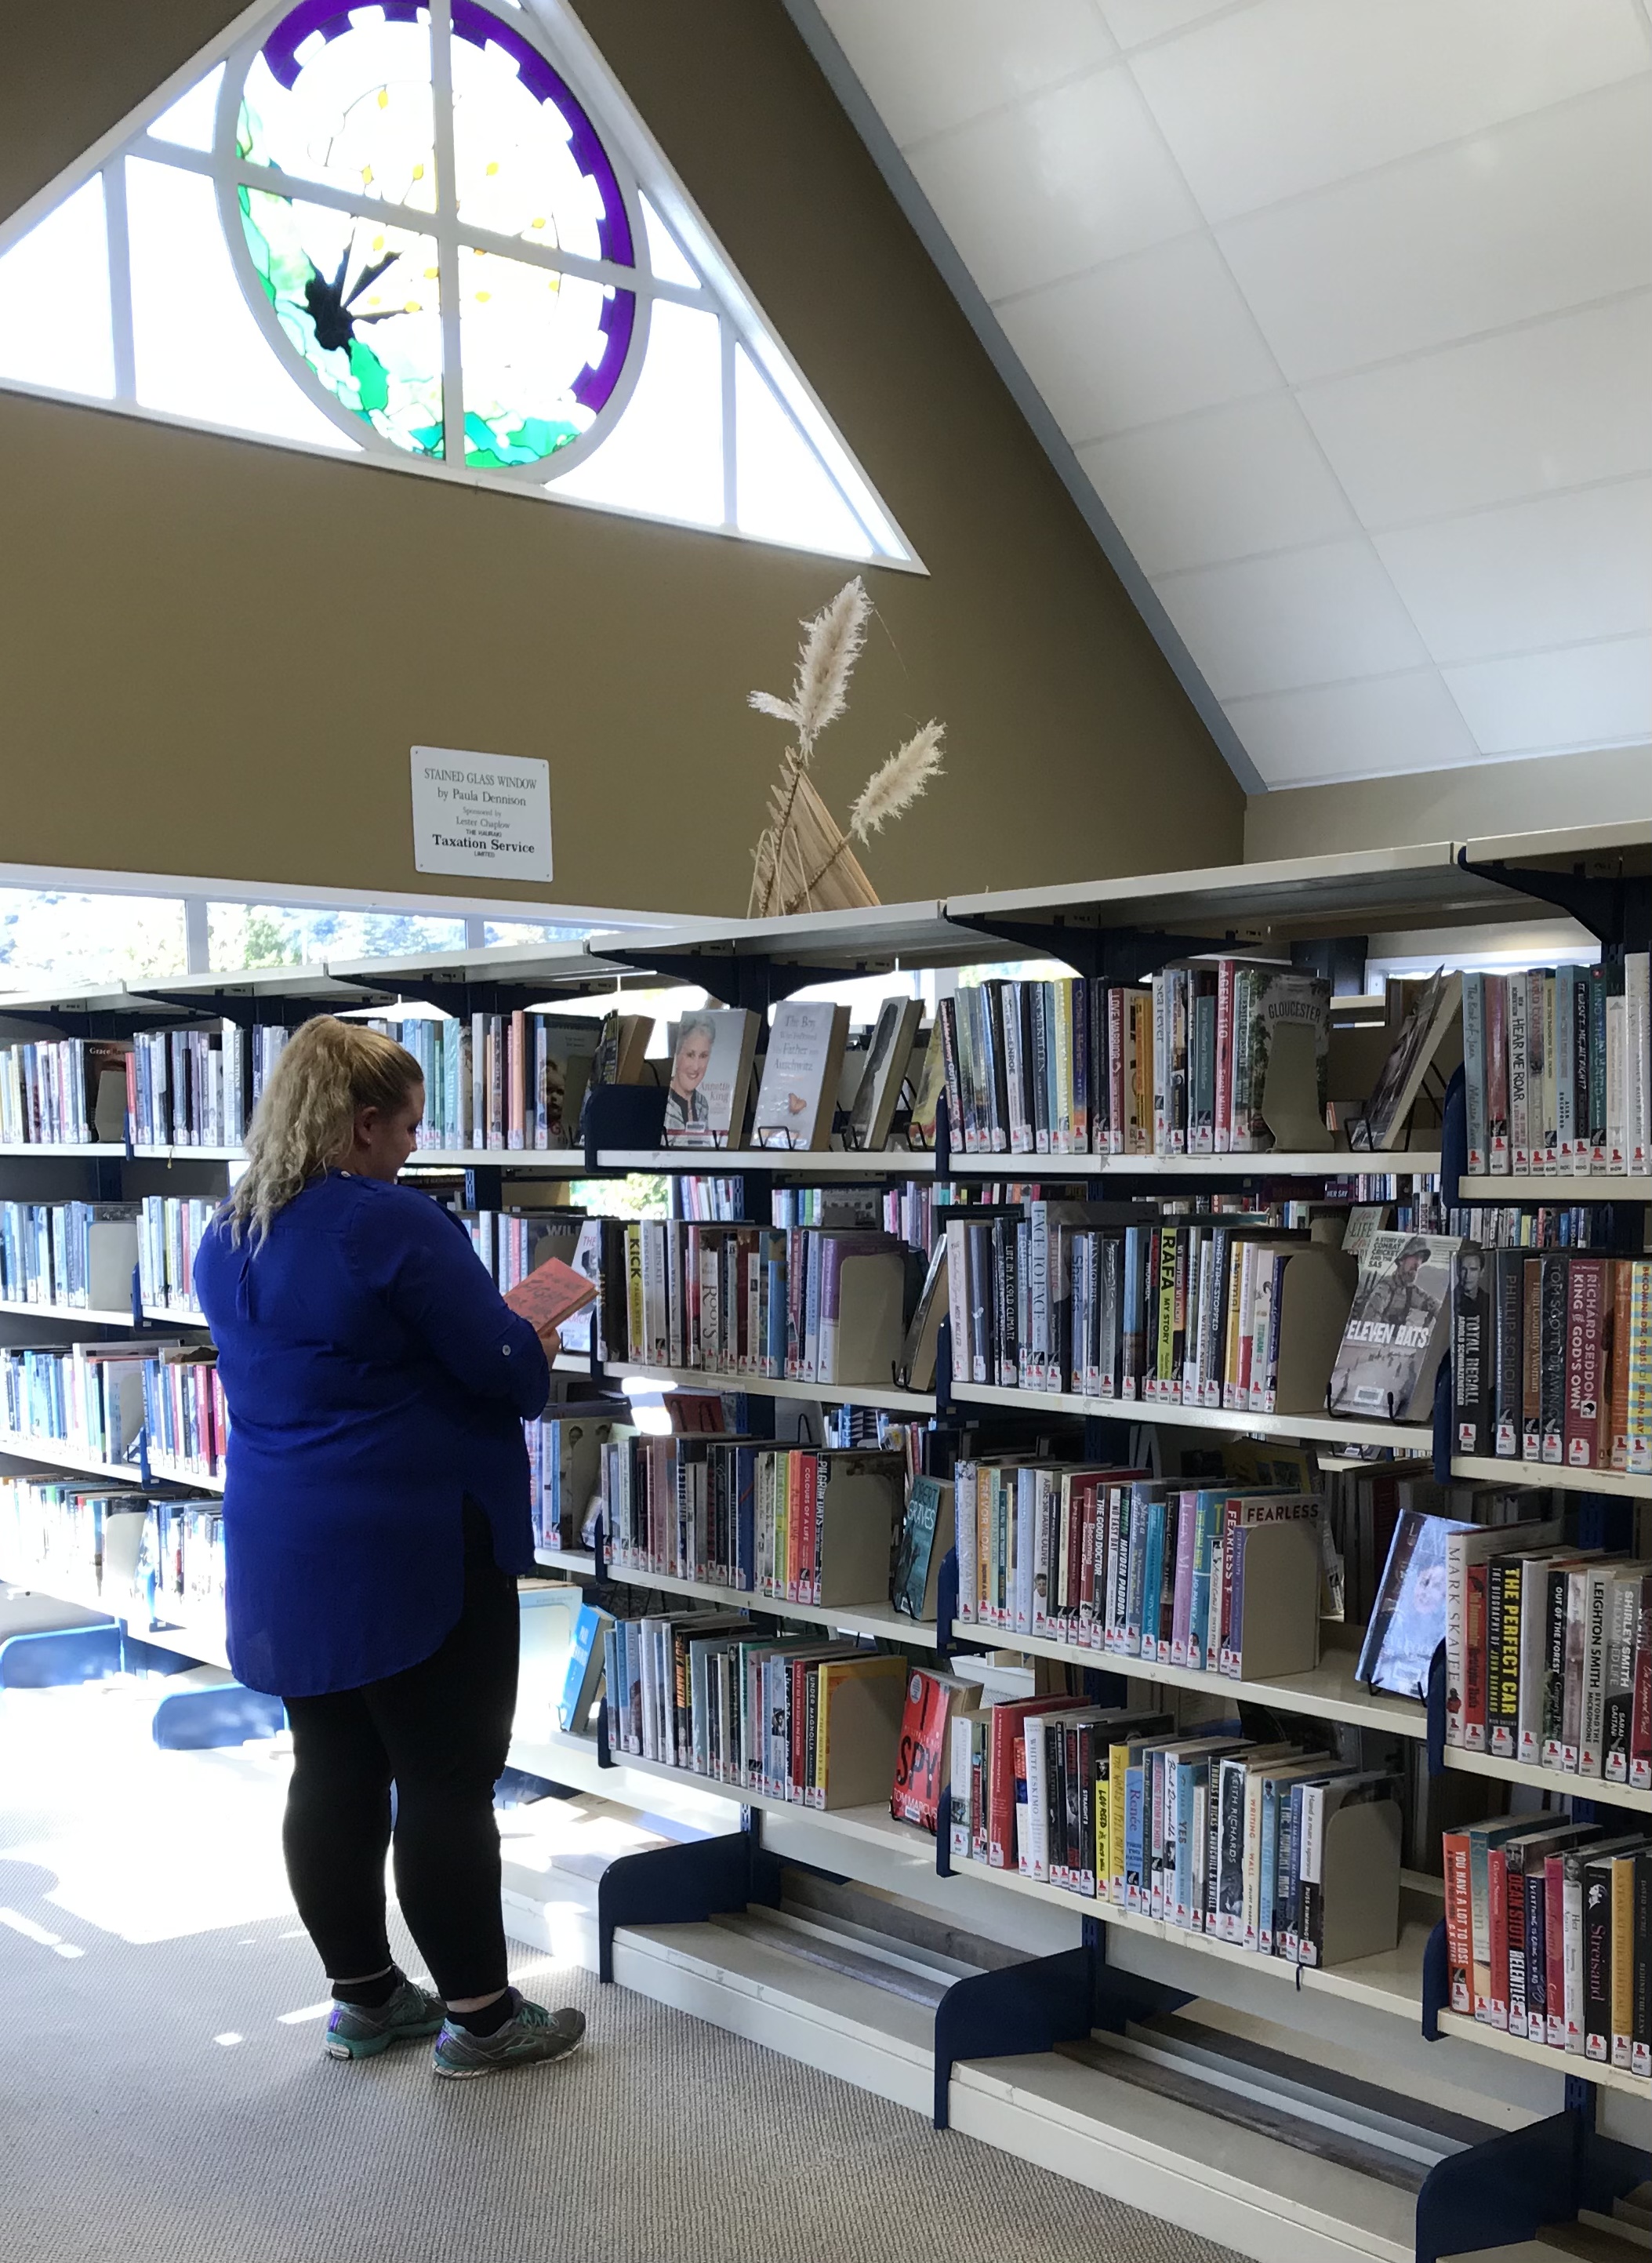 Browsing Thames Library shelves with stained glass window in the background